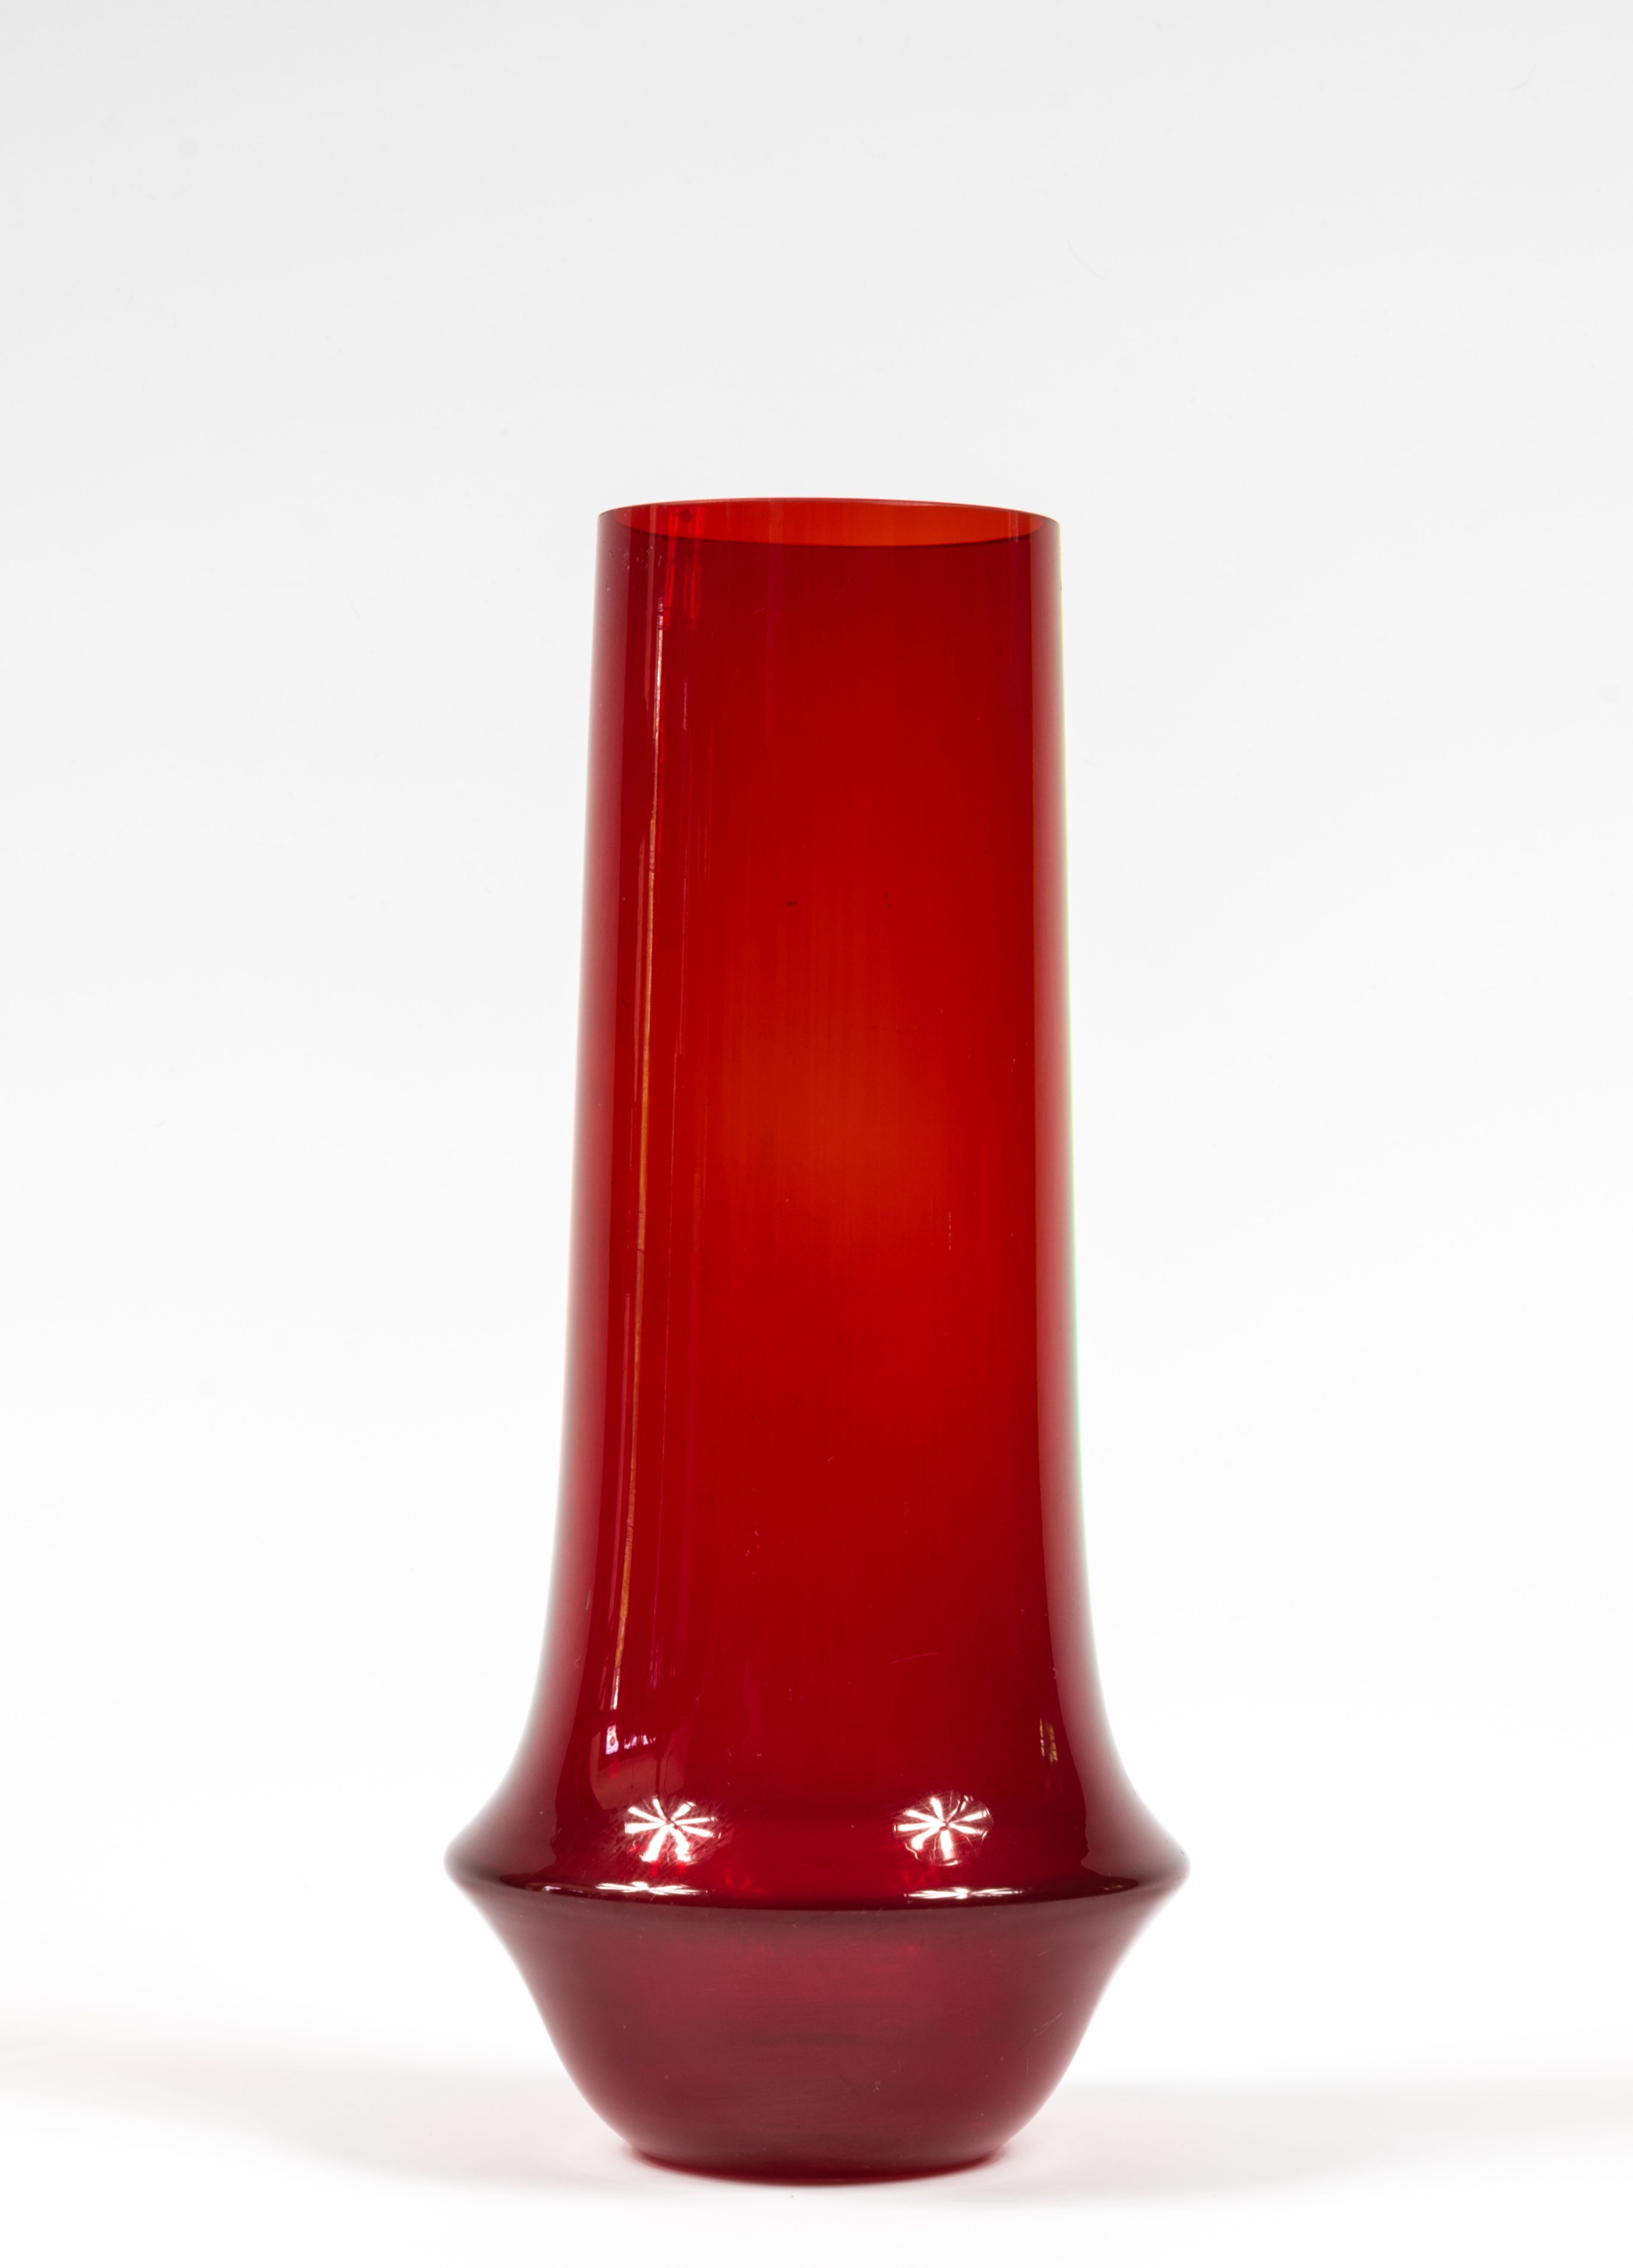 Large Clear Glass Vases for the Floor Of Riihima¤en Lasi Oy Riihimaki Red Glass Vase by Tamara Aladin Pertaining to Large Scandinavian Red Glass Vase Designed by Tamara Aladin C1963 for Riihimaki Riihimaen Lasi Oy